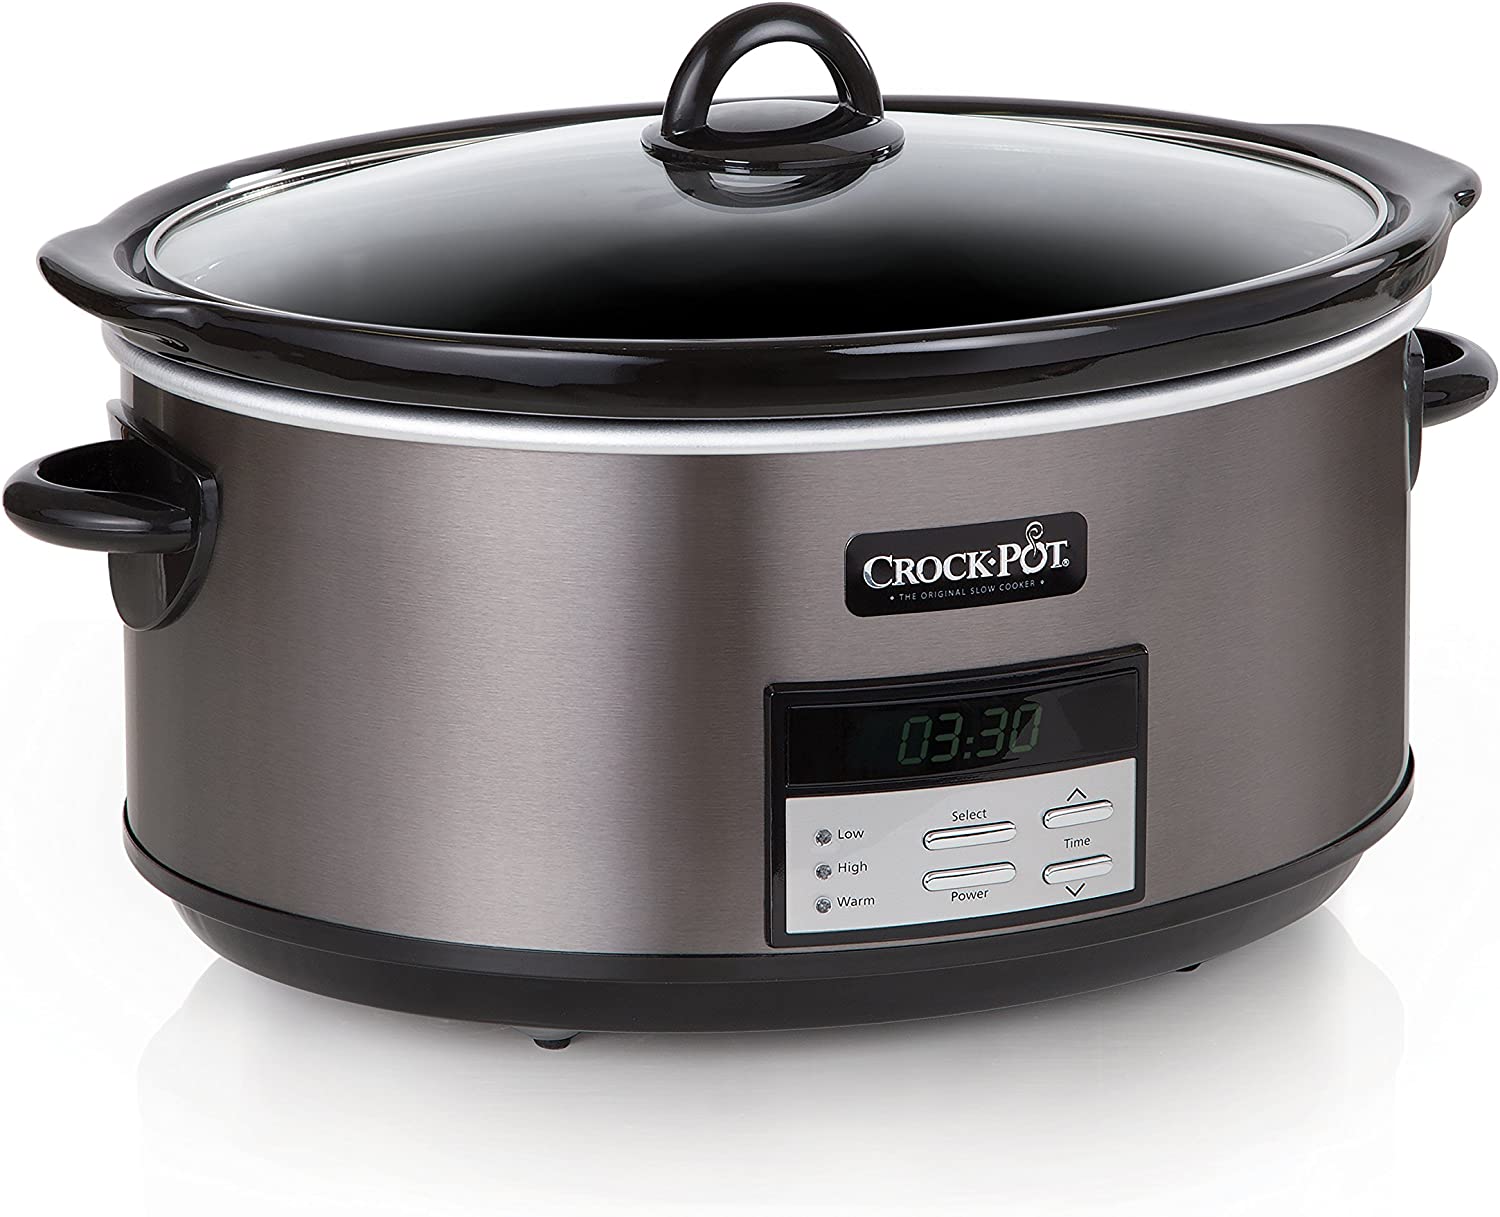 https://bigbigmart.com/wp-content/uploads/2023/03/Crock-Pot-8-Quart-Slow-Cooker-with-Auto-Warm-Setting-and-Cookbook-Black-Stainless-Steel.jpg